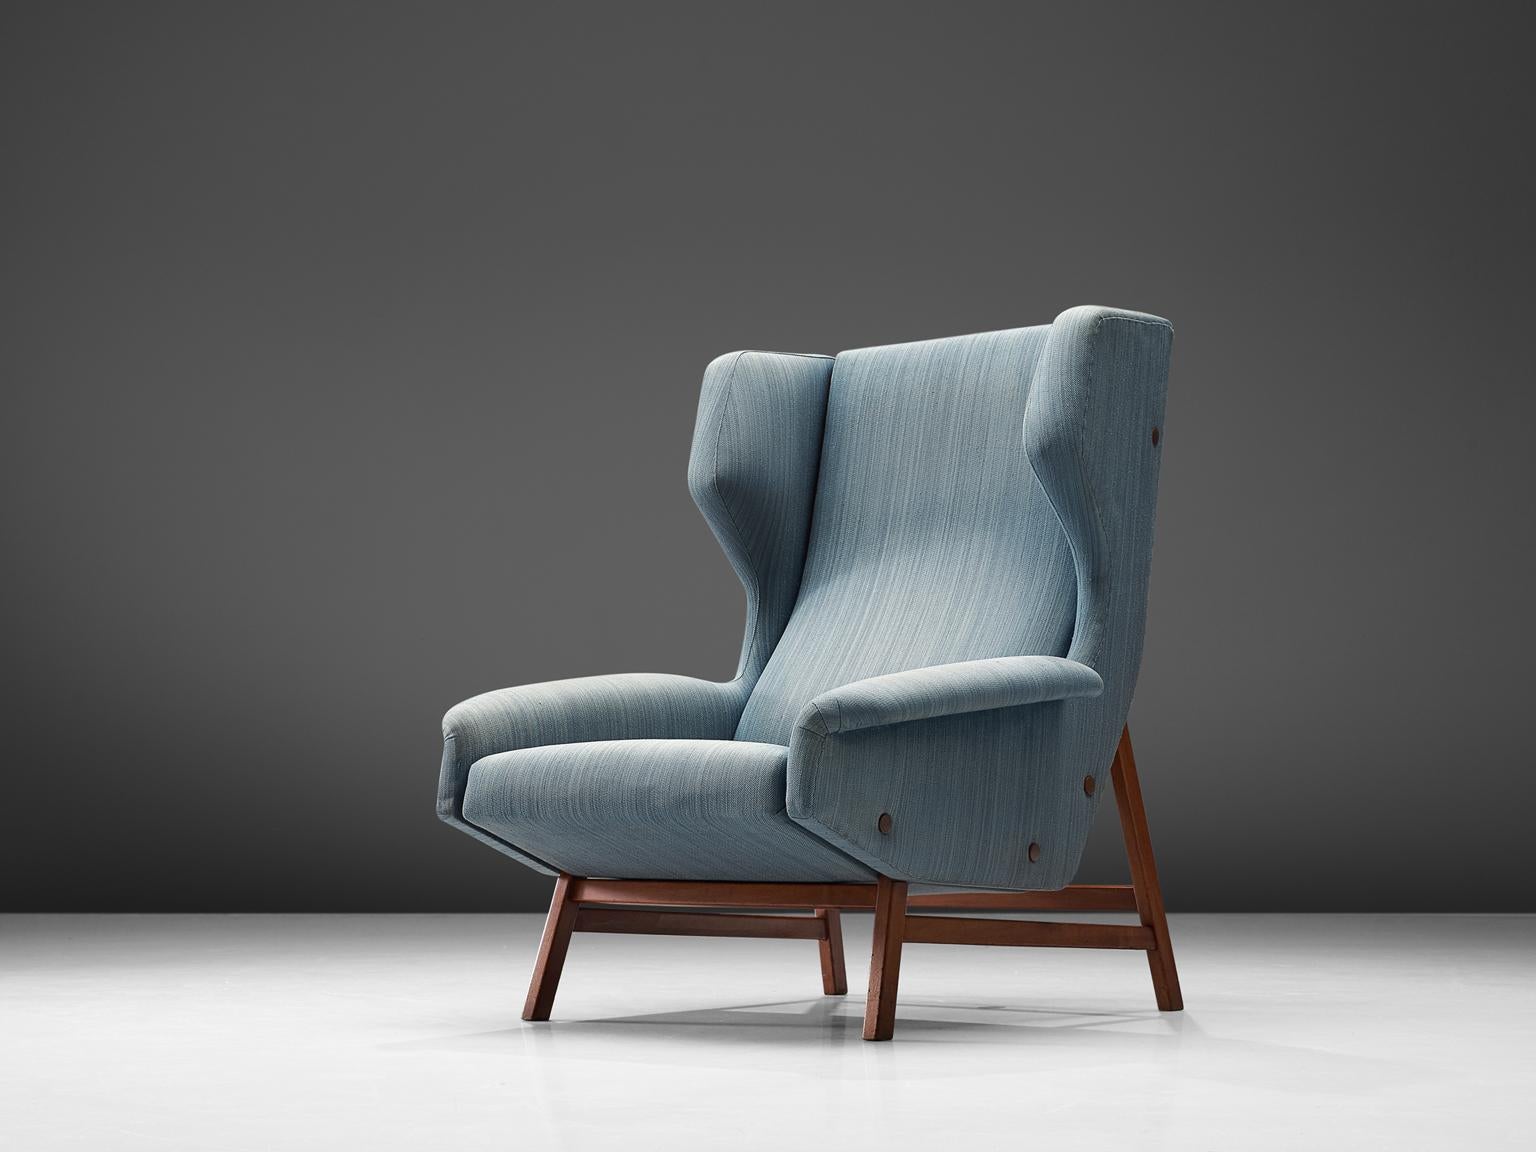 Gianfranco Frattini for Cassina, lounge chair model 877, blu fabric and teak, Italy, circa 1959.

Sturdy and voluminous lounge chair in blue original fabric. This wingback chair shows nice details and elegant lines. The buttons on the outside of the